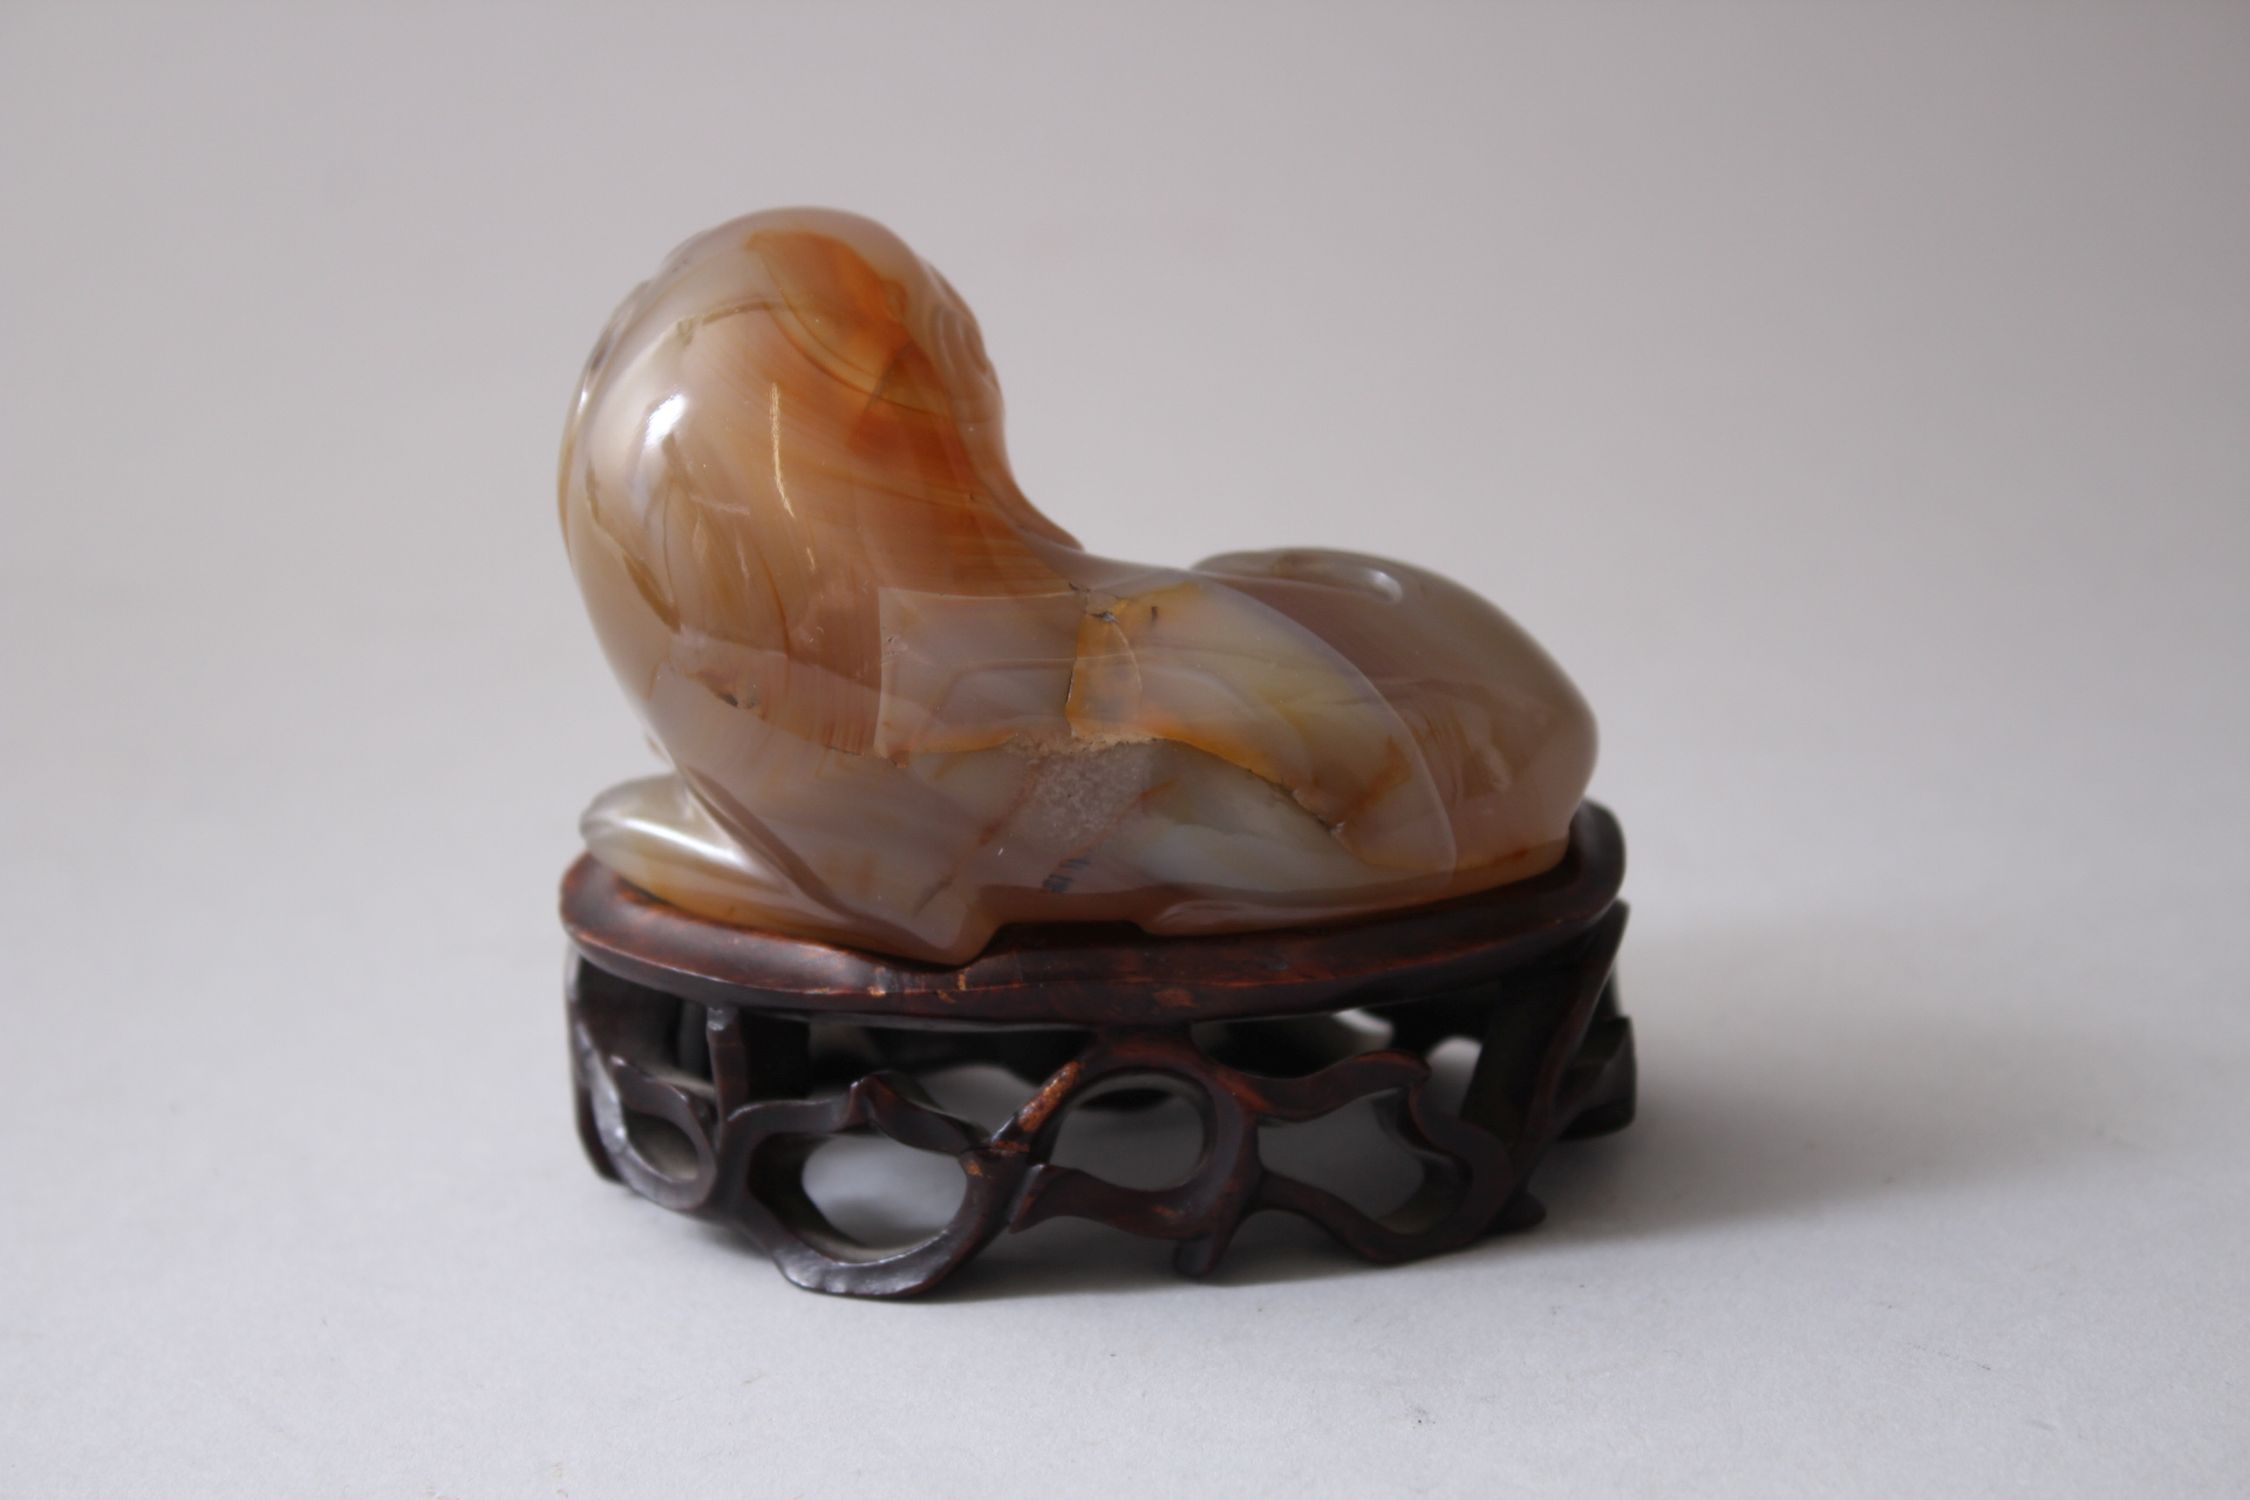 A 19TH CENTURY CHINESE AGATE CARVED FIGURE OF A DOG & HARDWOOD STAND, the agate dog measures 5cm - Image 2 of 3